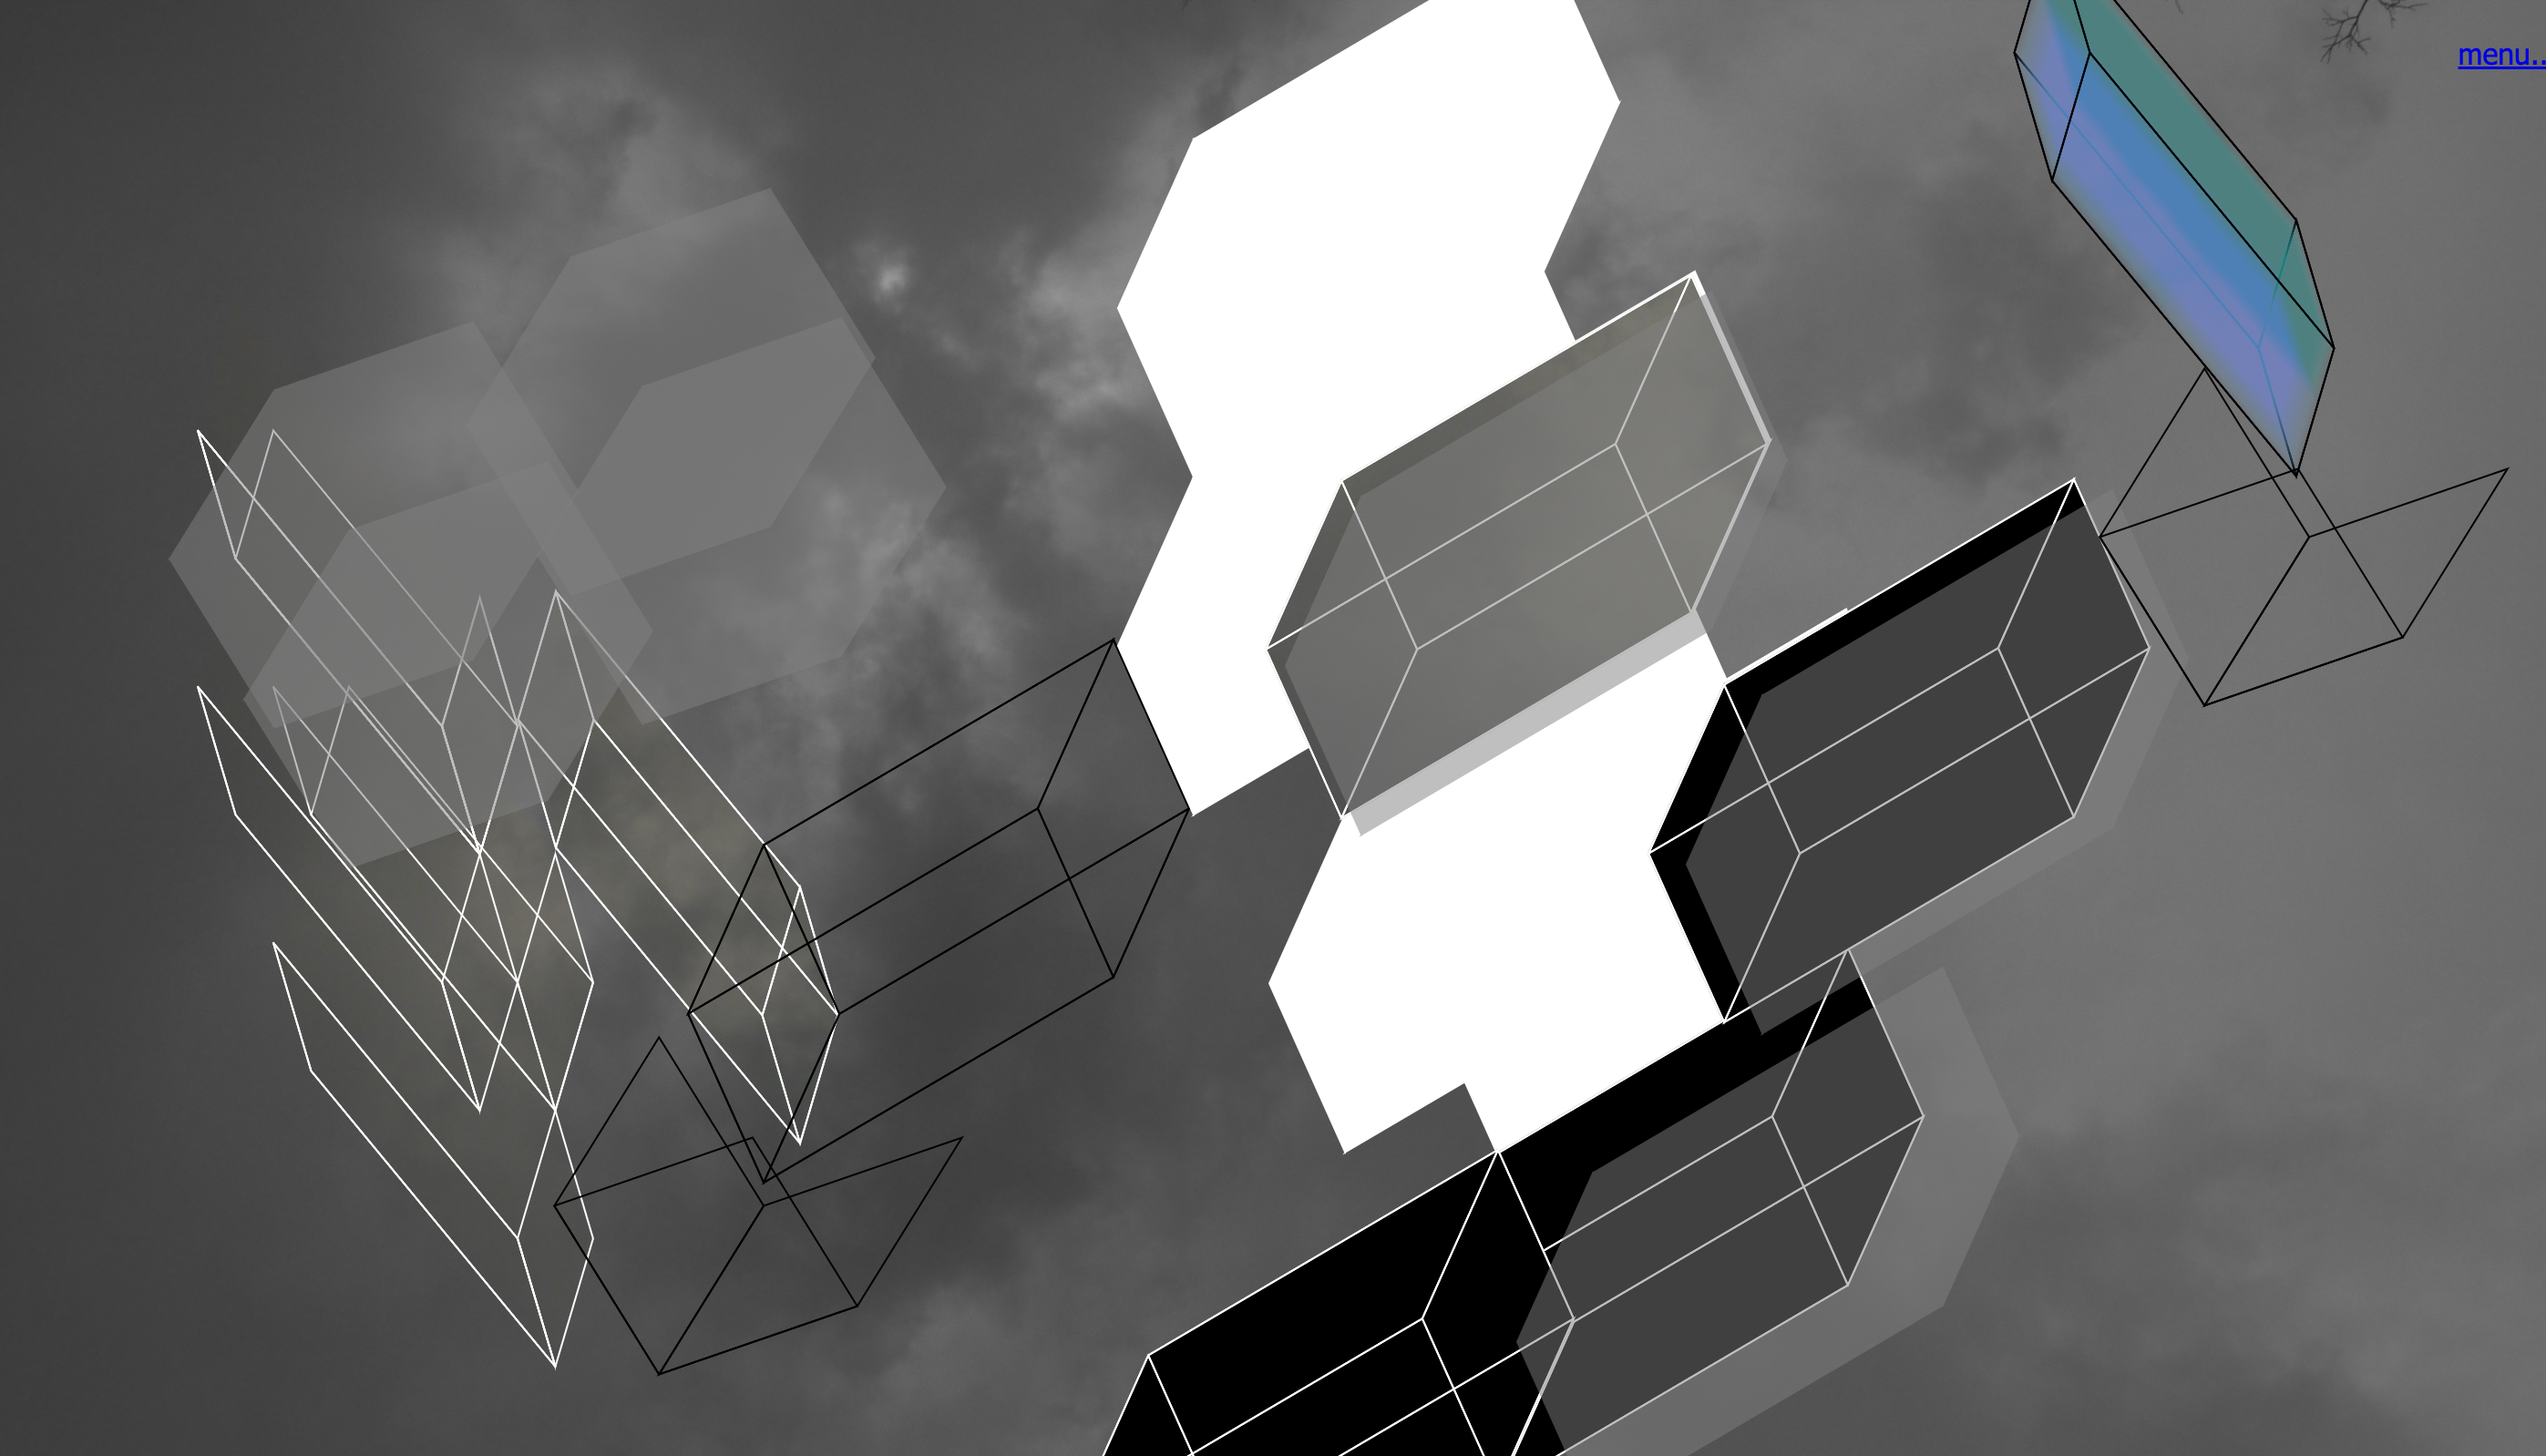 Image: screenshot of Text Fields, Morgan Green. Against a grey scale sky, geometric bricks are cut out to reveal white underneath. There are white outlines to the bricks. Screenshot by the author.